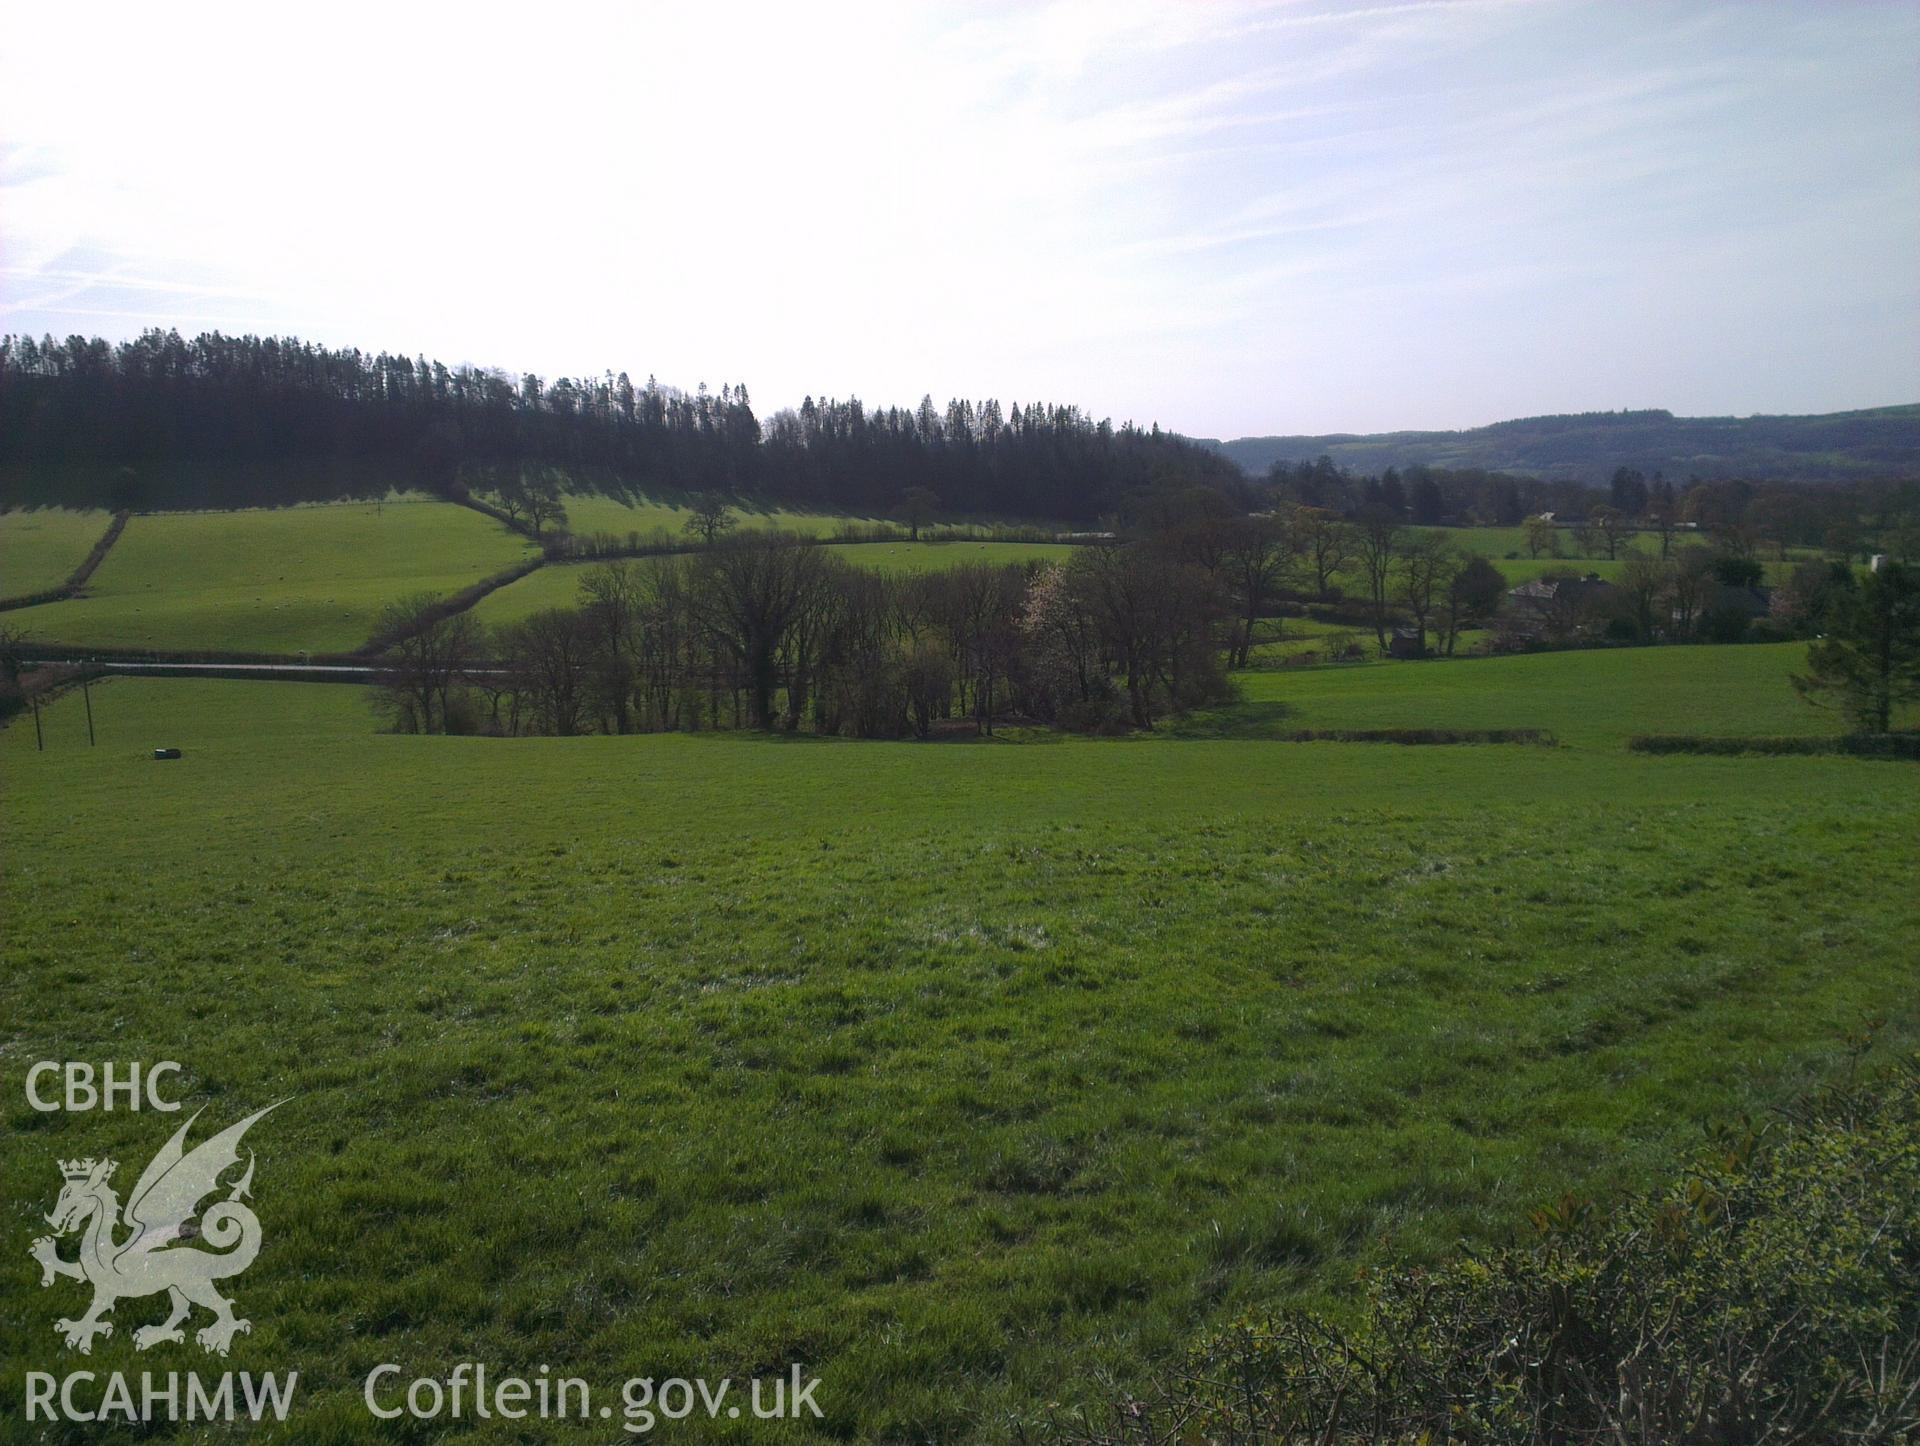 Digital colour photograph of the Coed Llathen battlefield. Photographed during Phase Three of the Welsh Battlefield Metal Detector Survey, carried out by Archaeology Wales, 2012-2014. Project code: 2041 - WBS/12/SUR.